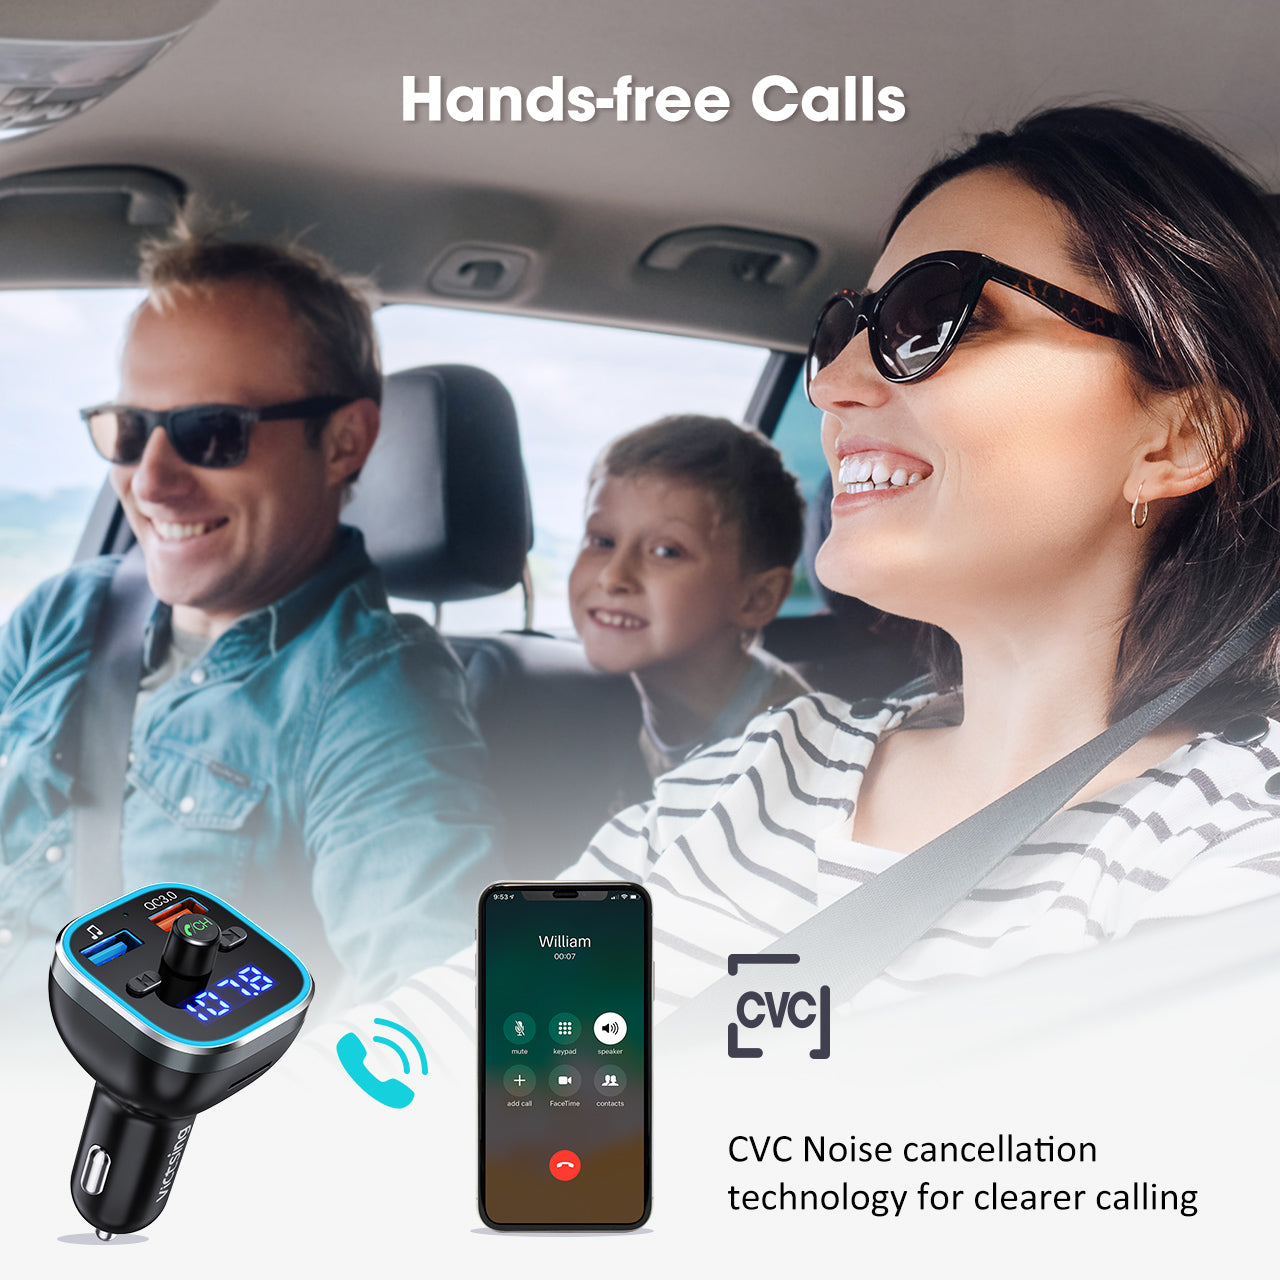 Bluetooth Fm Transmitter Car F6 With Bluetooth Fm Transmitter 5.0, FM  Transmitter, Handsfree Adapter, RGB Atmosphere Light Lamp, And Audio  Recording Includes Retail Box From Spacex, $3.21